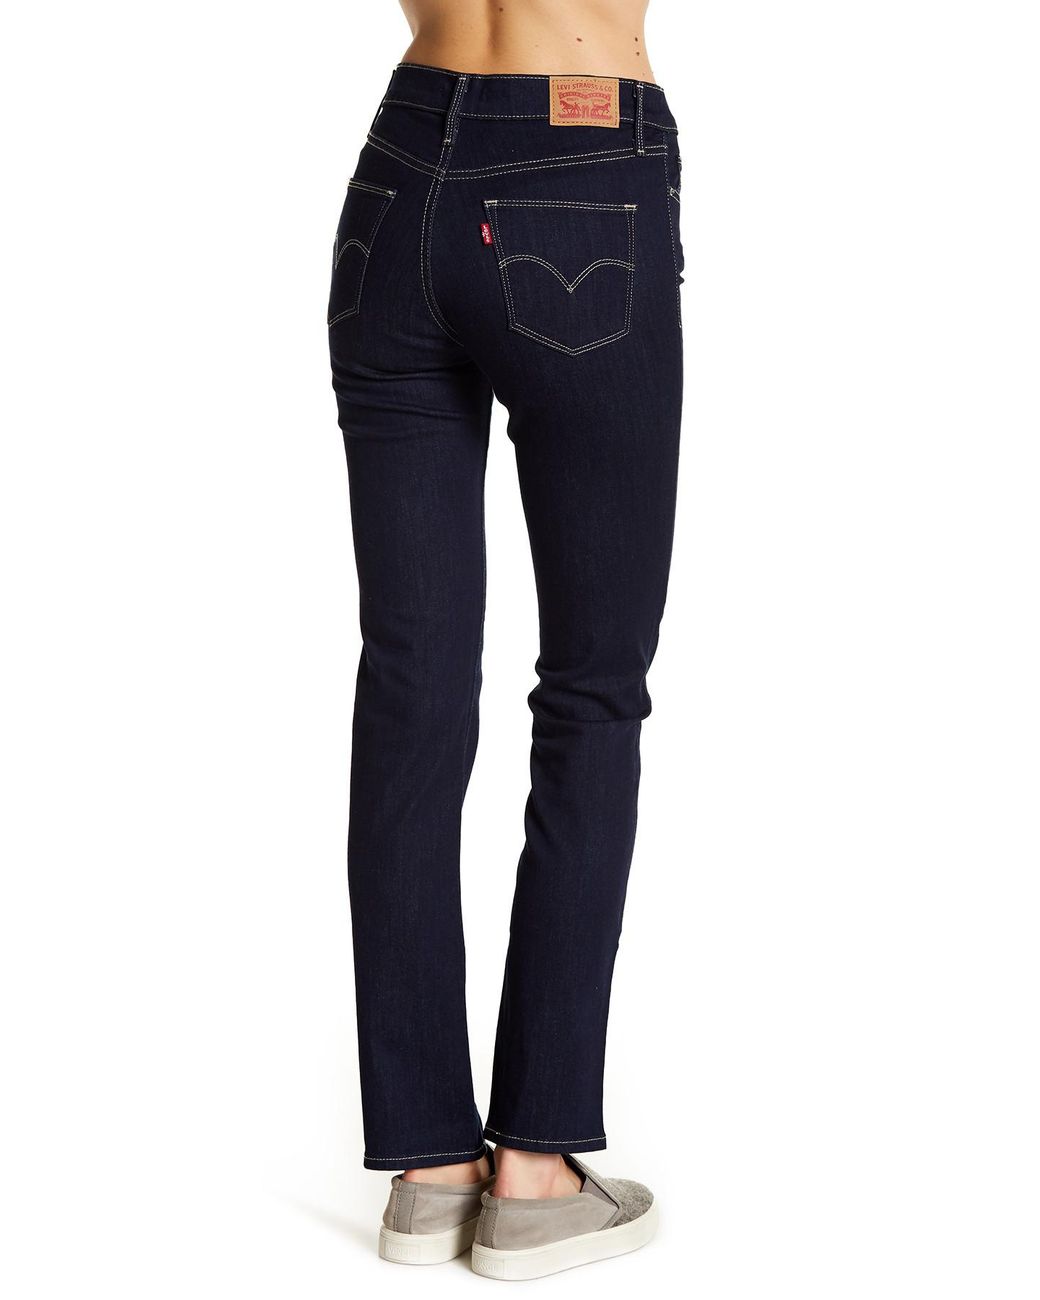 Levi's Slimming Slim Fit Jeans in Blue